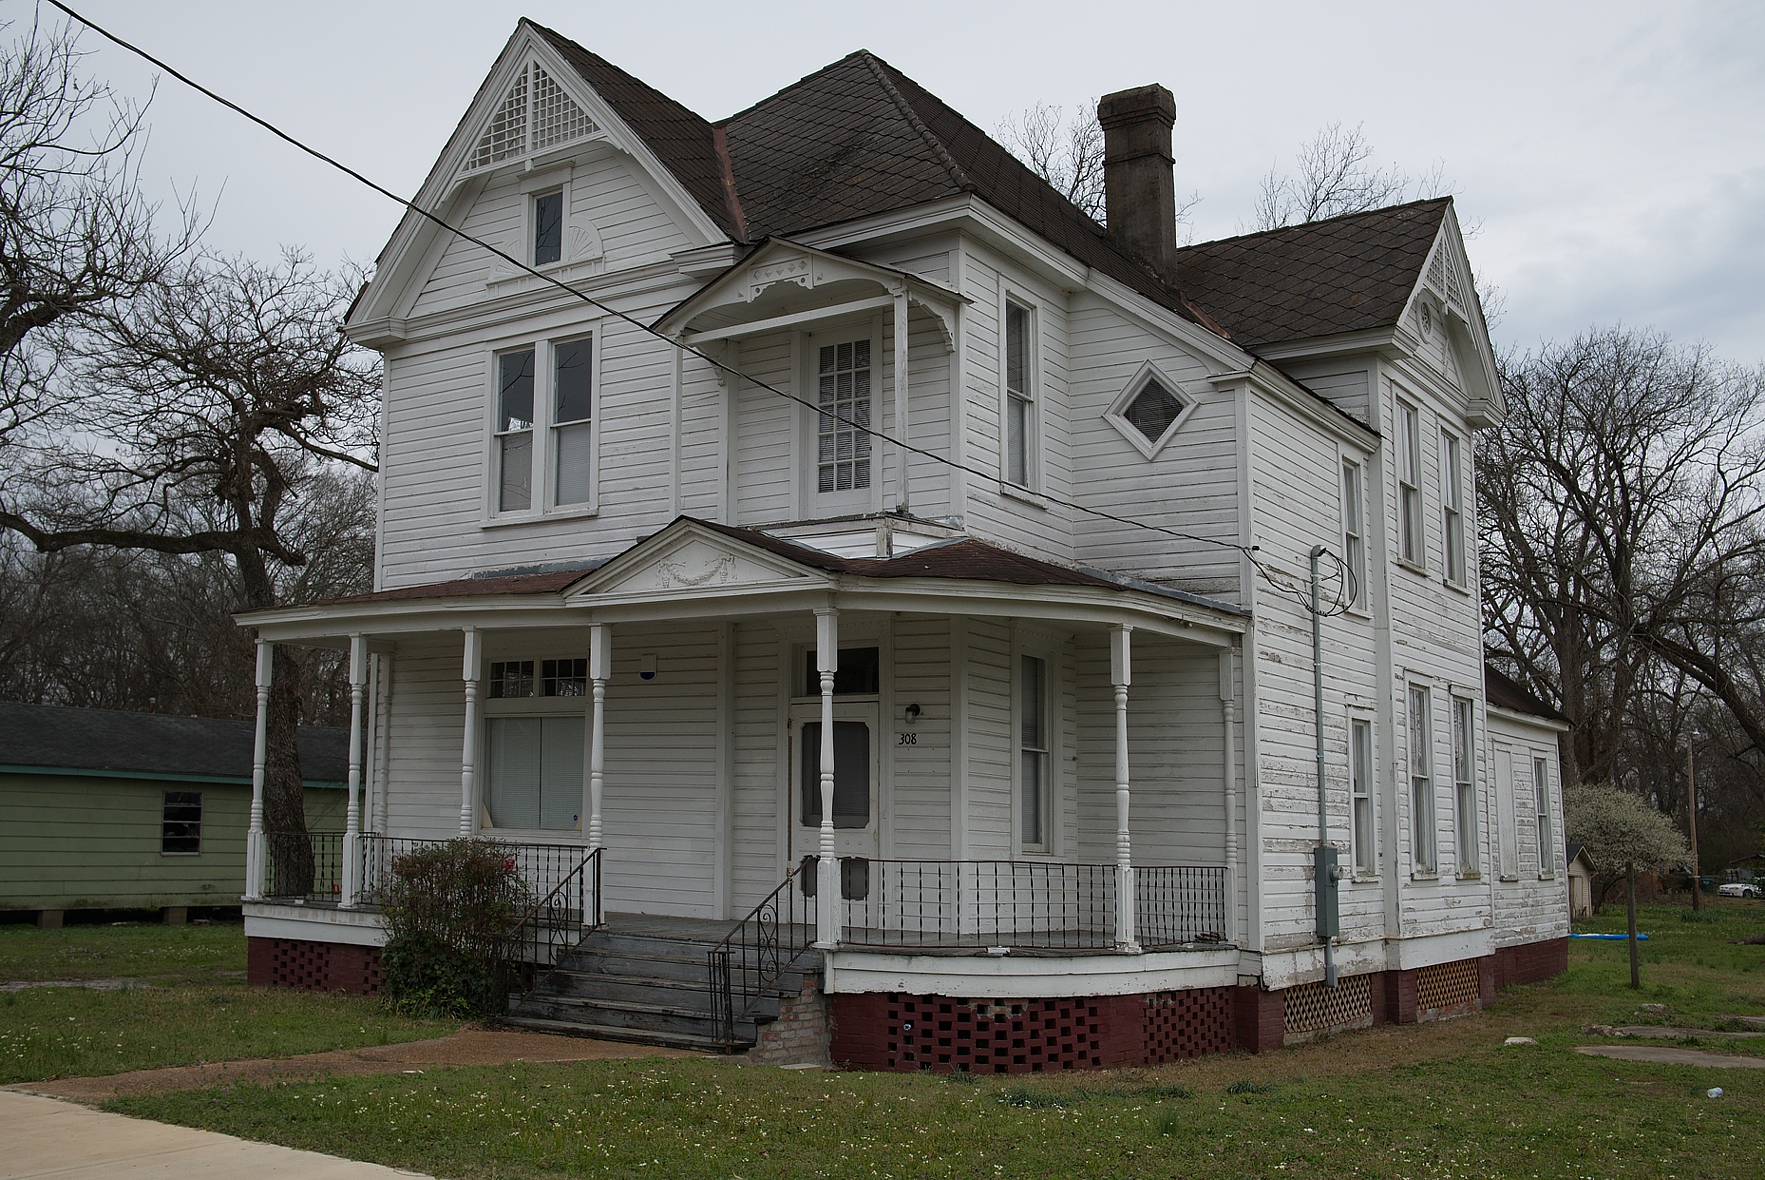  One of many older homes in Canton 